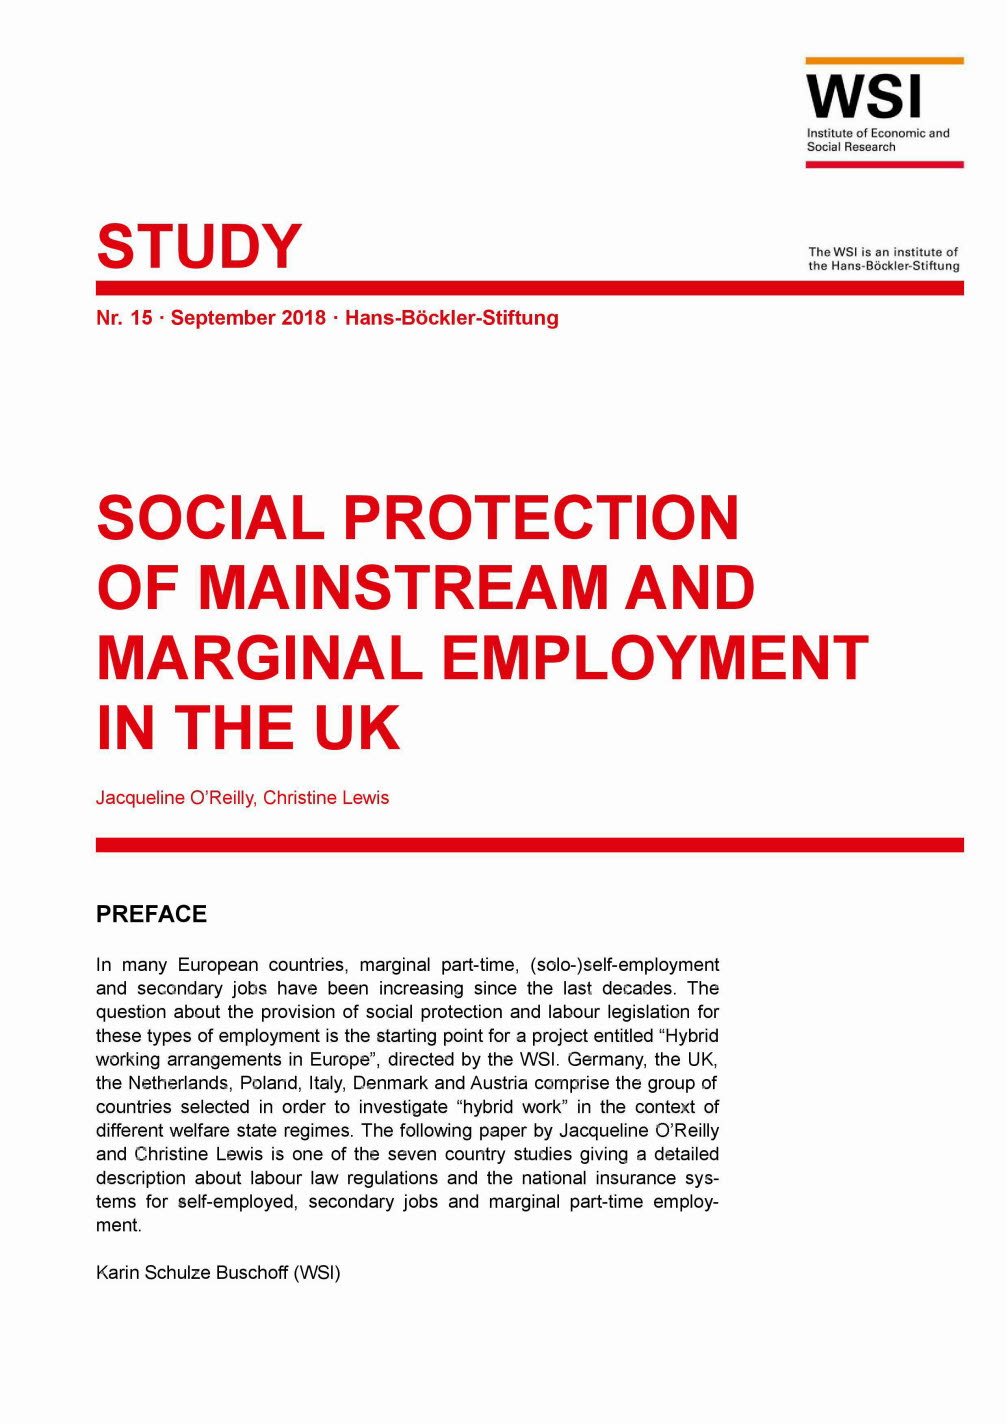 Social protection of mainstream and marginal employment in the UK